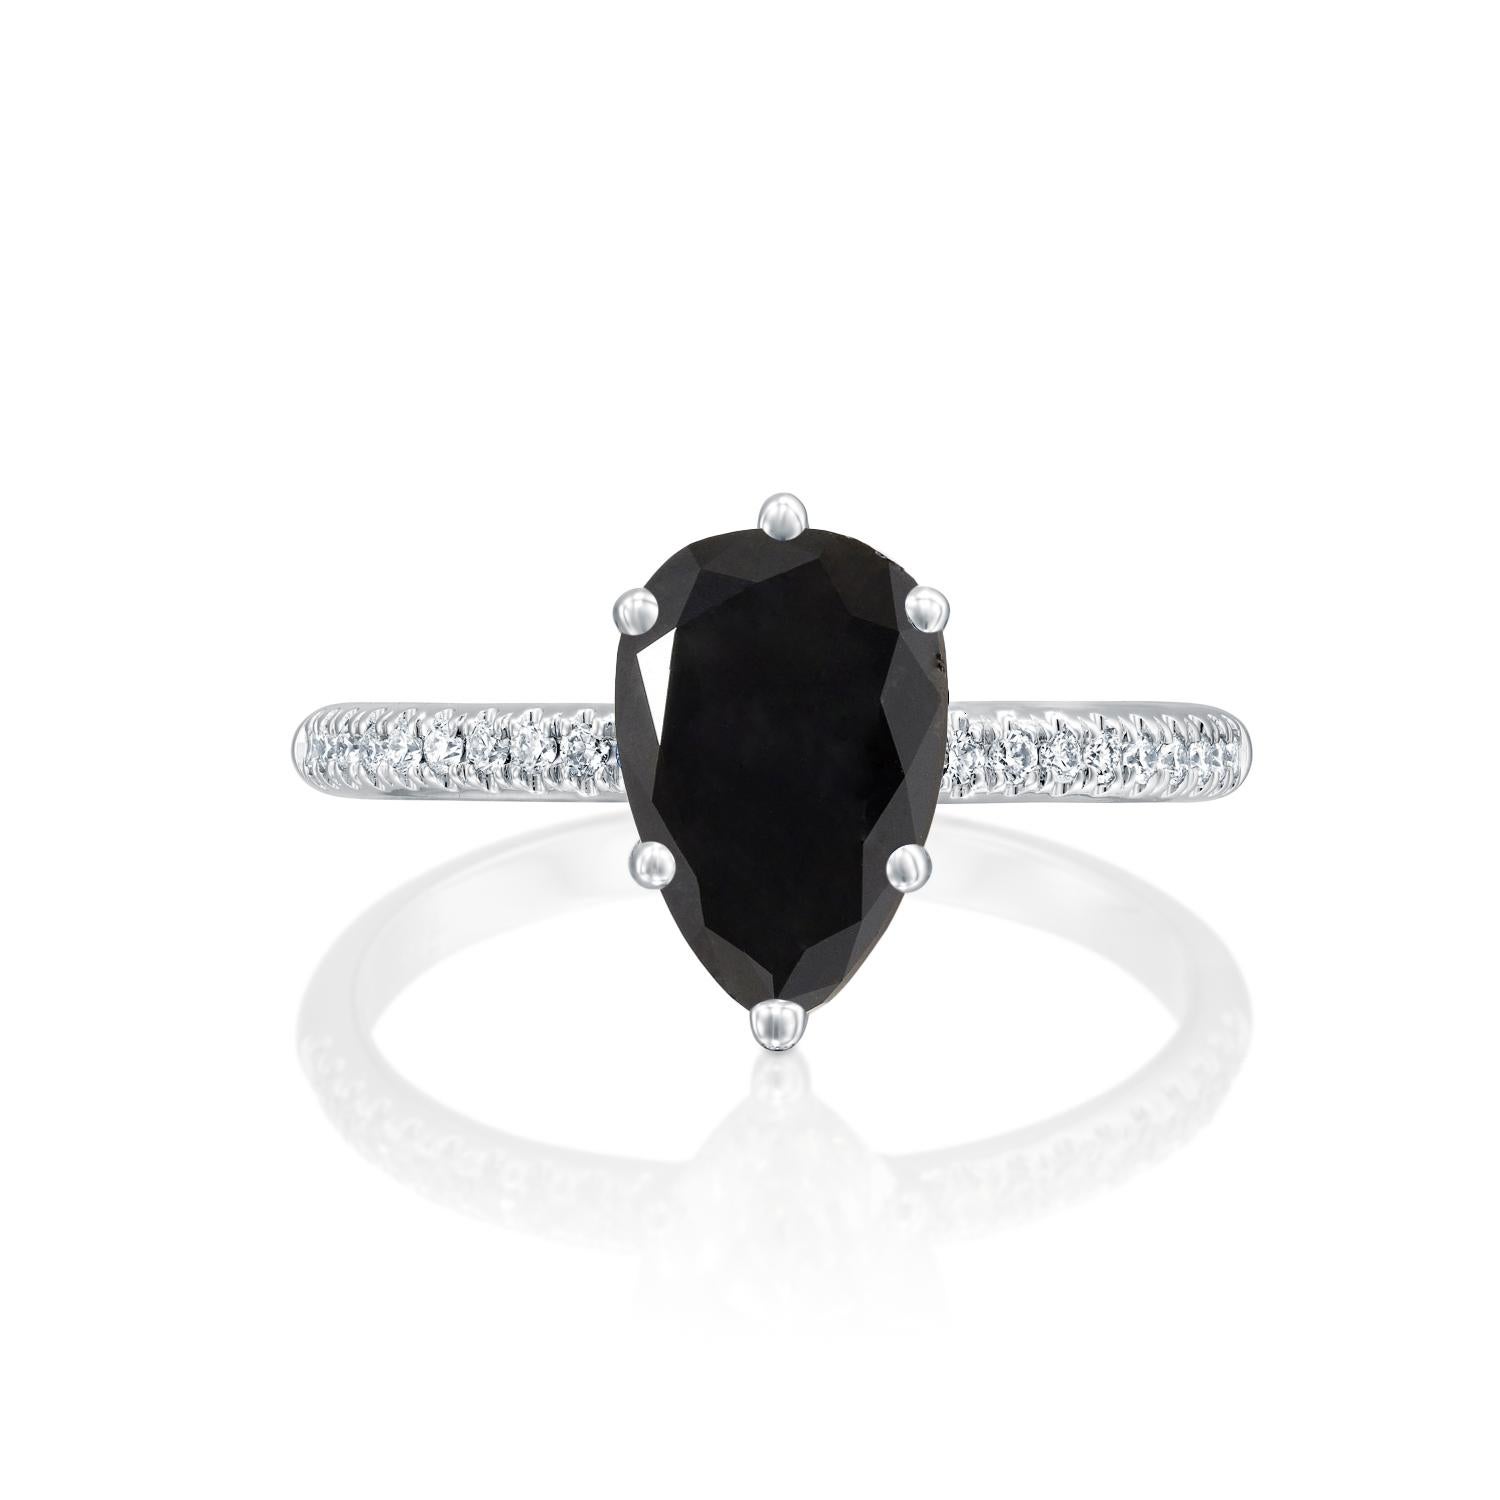 Beautiful solitaire with accents vintage style diamond engagement ring. Center stone is natural, pear shaped, AAA quality Black Diamond of 2 carat and it is surrounded by smaller natural diamonds approx. 0.2 total carat weight. The total carat